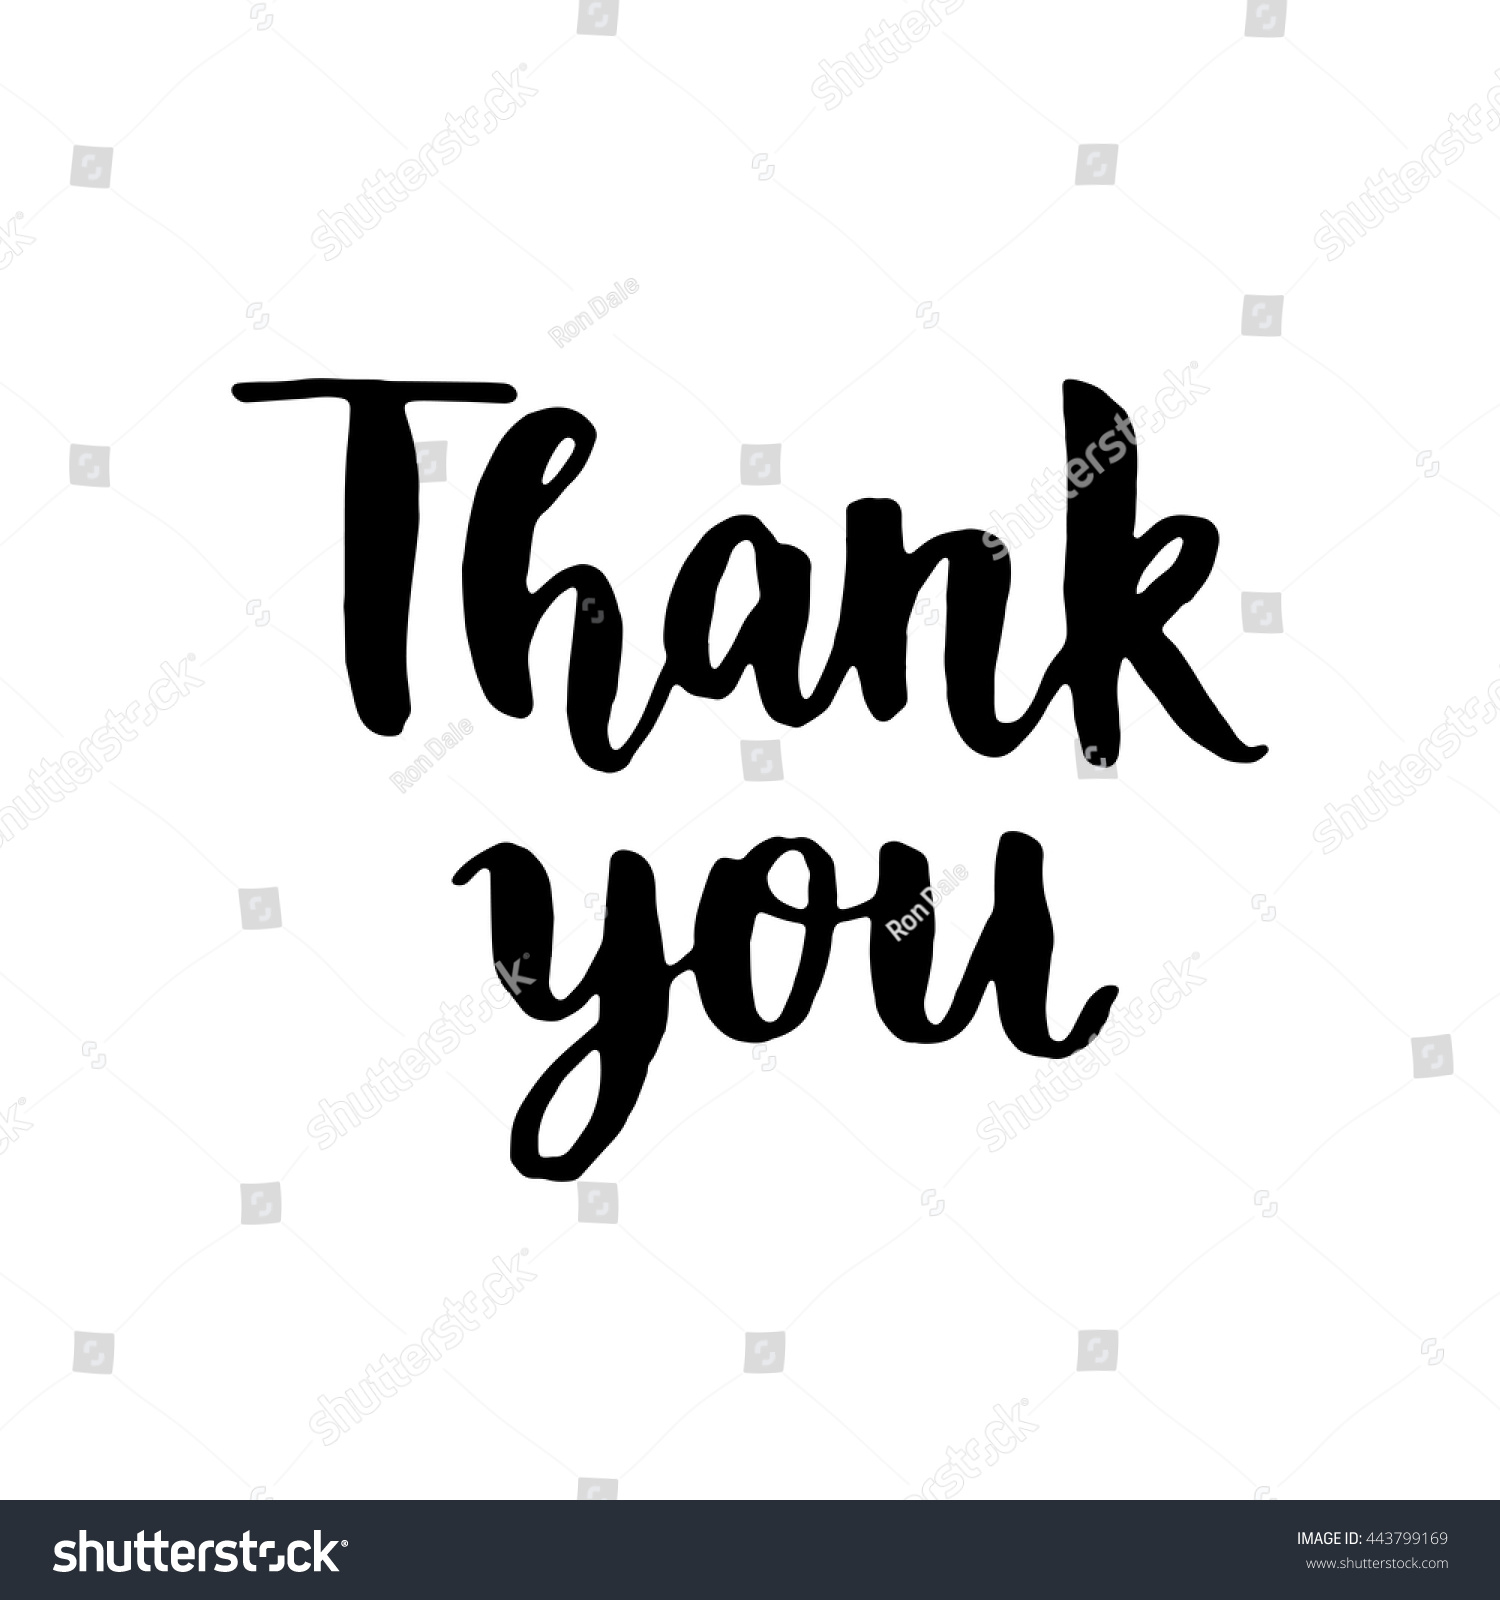 Thank You Card Hand Drawn Thanks Stock Vector 443799169 - Shutterstock